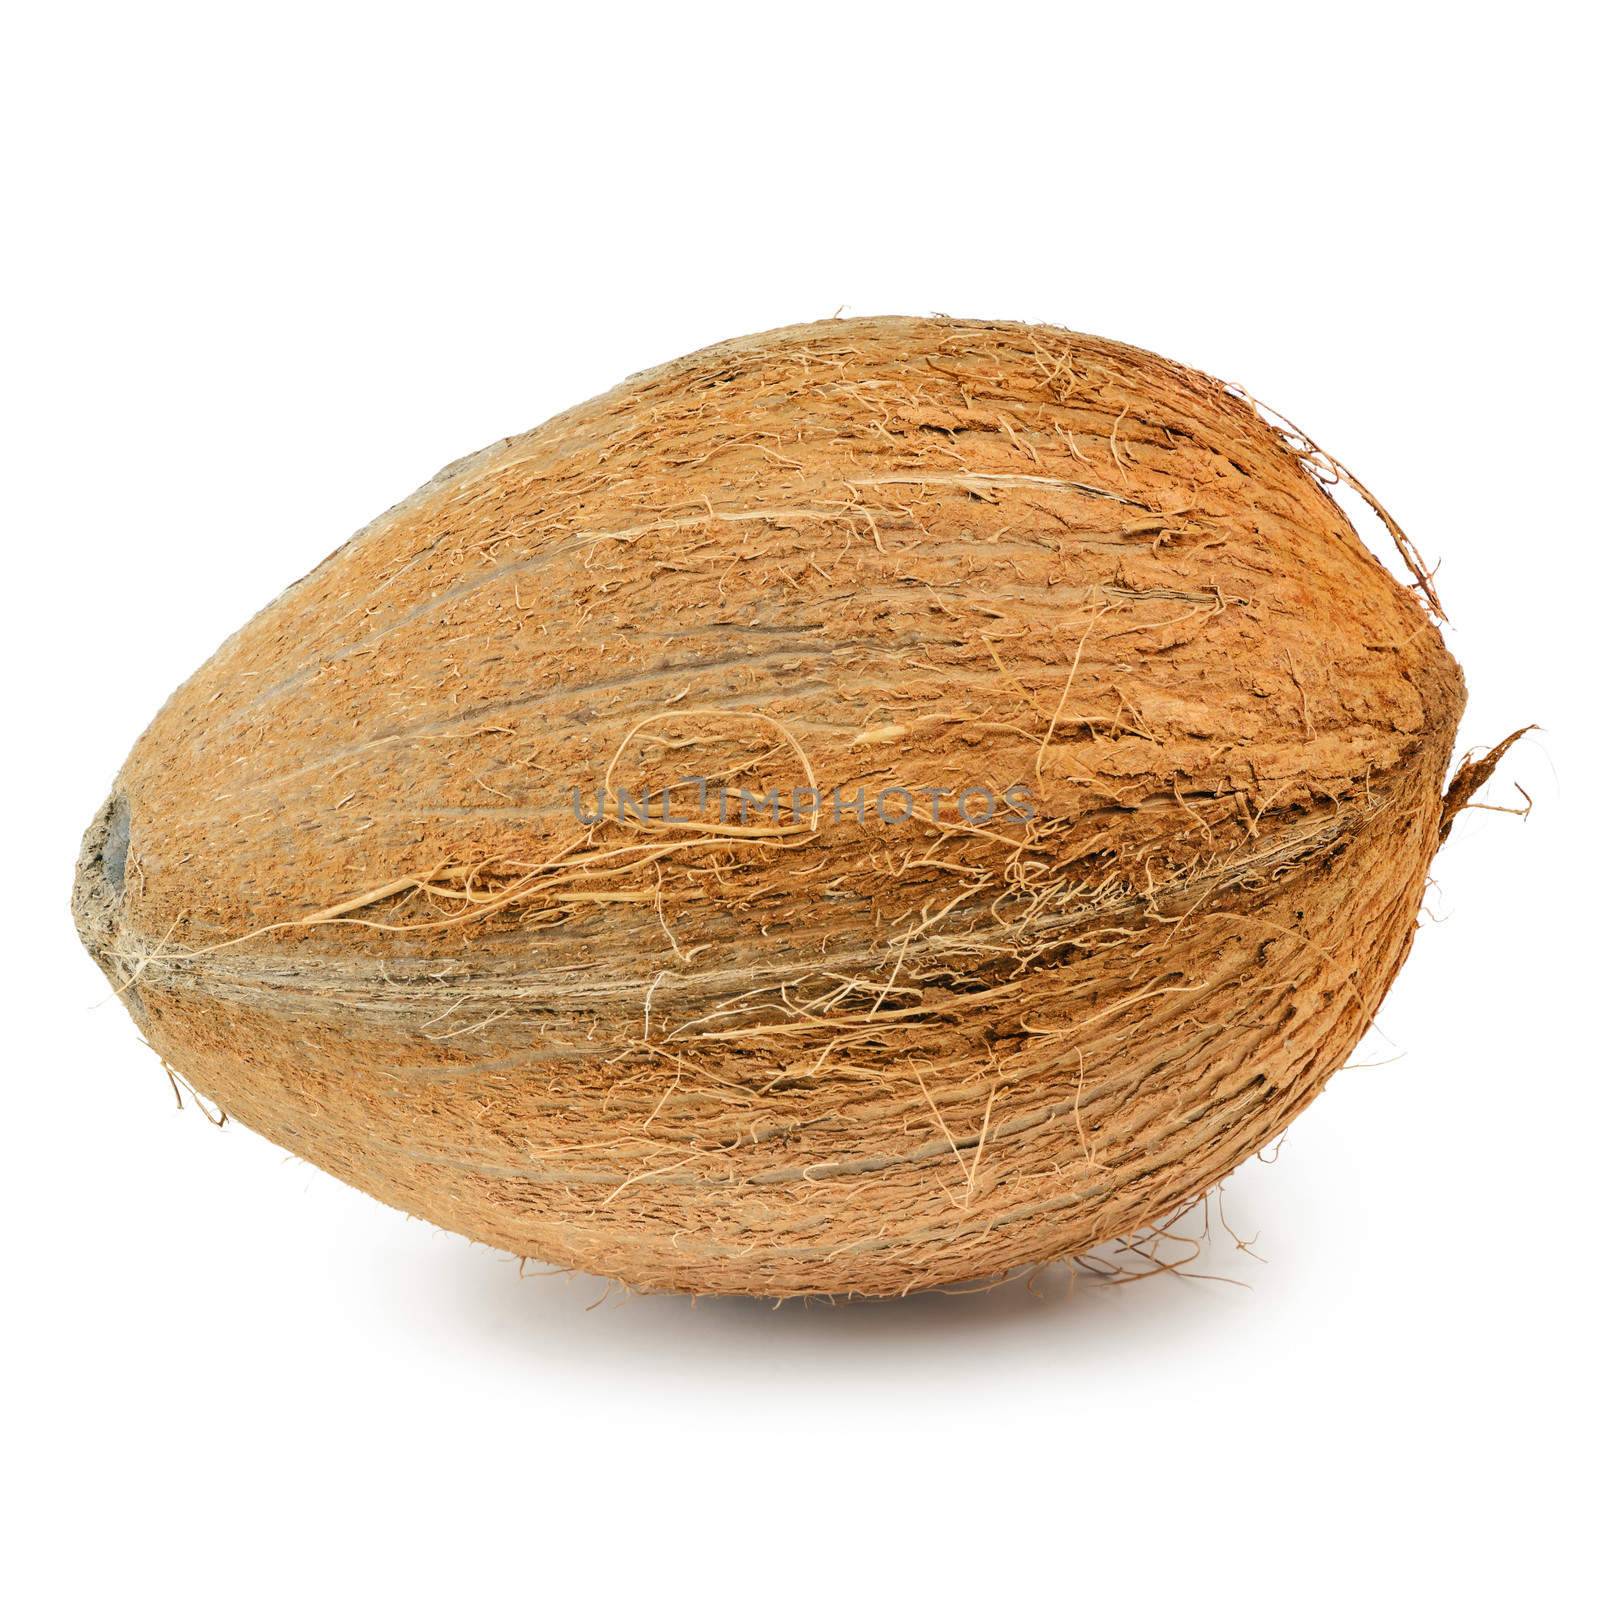 Single Hard-shelled Coconut Over The White Background